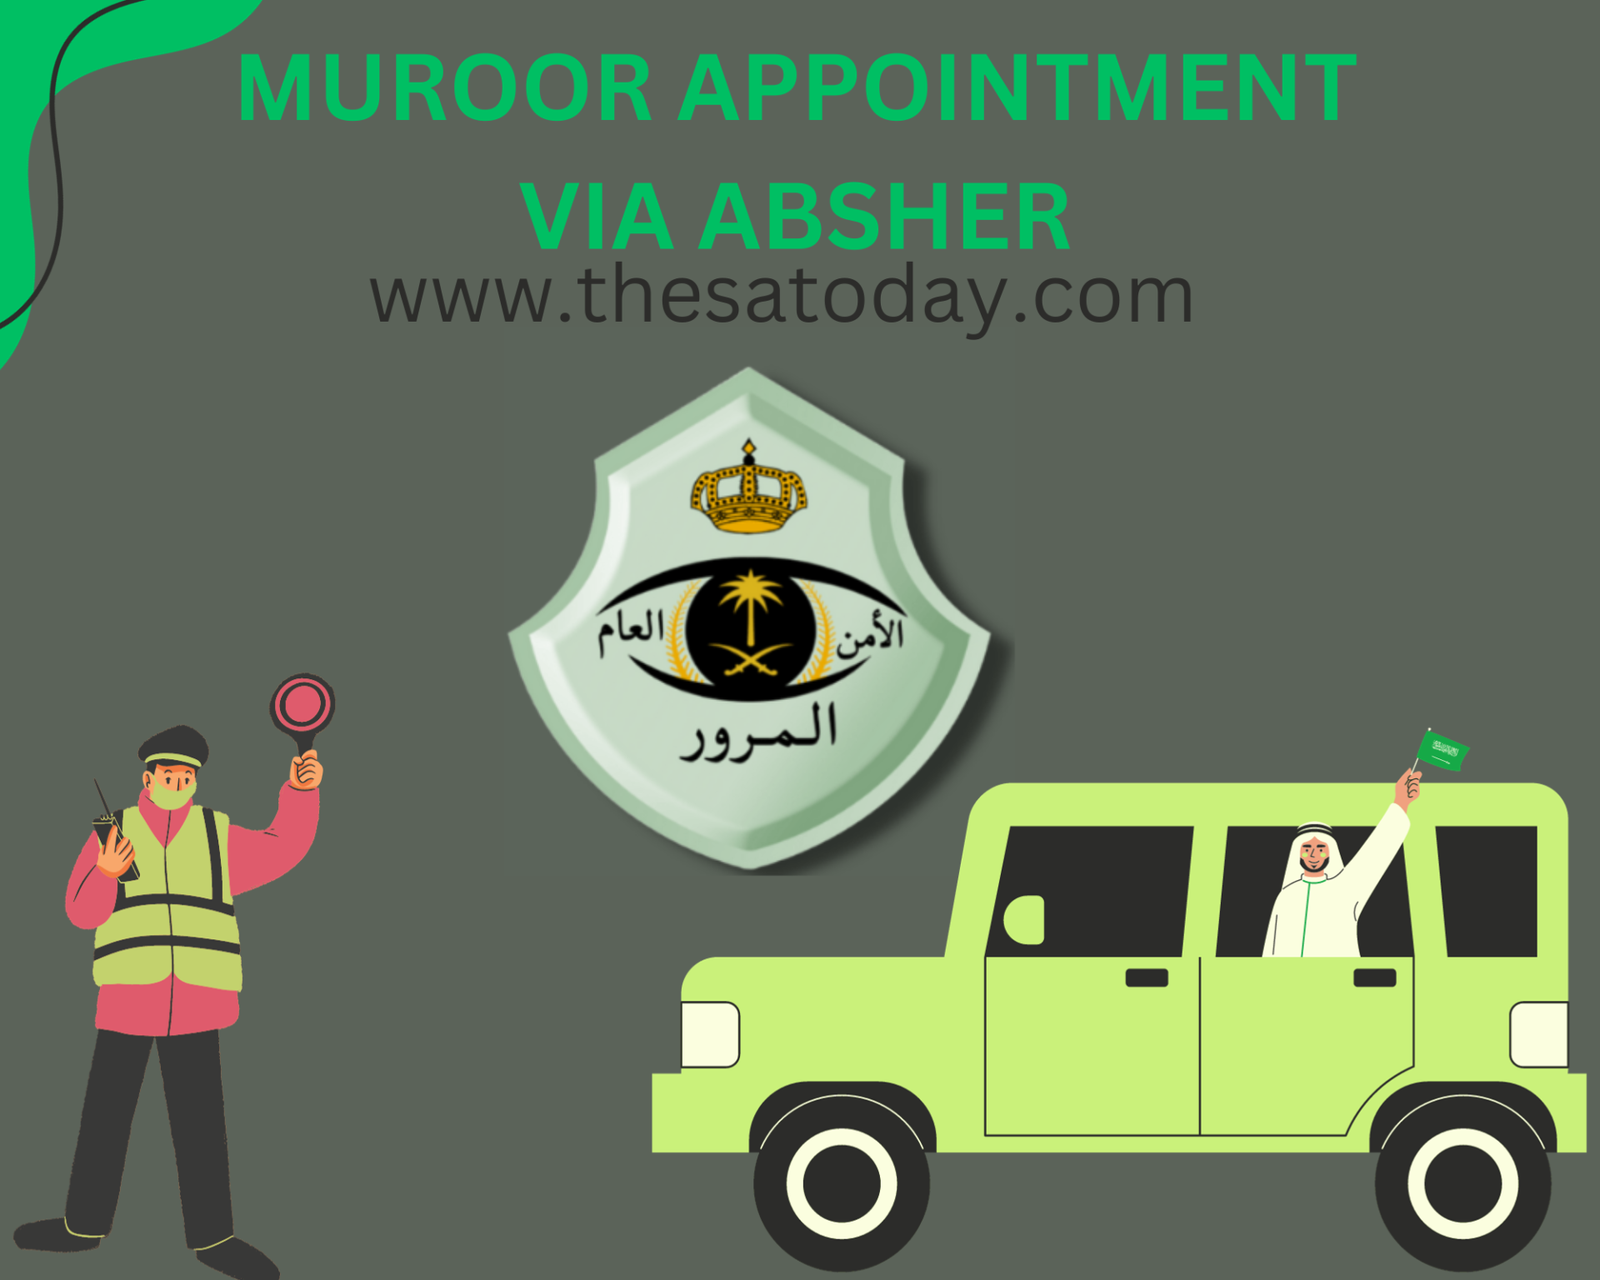 Muroor Appointments using Absher